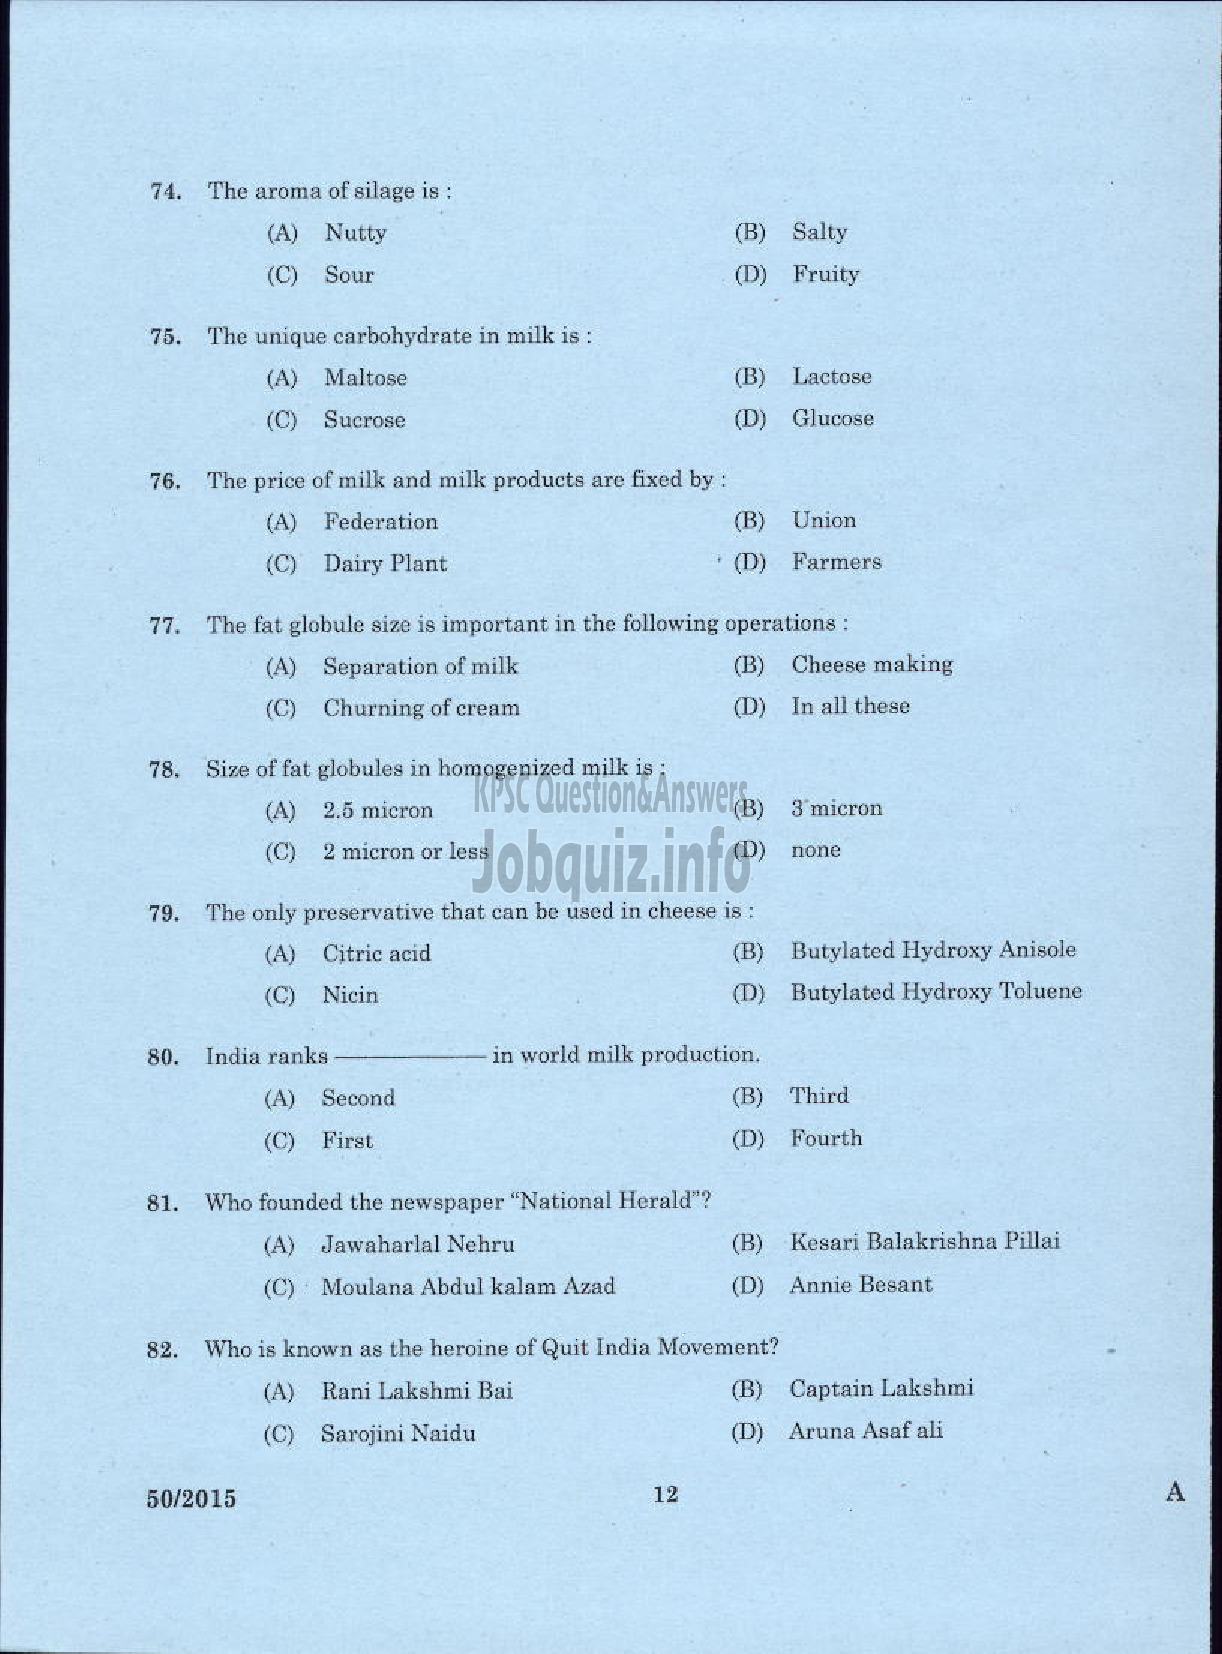 Kerala PSC Question Paper - LABORATORY TECHNICAL ASSISTANT DAIRYING AND MILK PRODUCTS VOCATIONAL HIGHER SECONDARY EDUCATION-10